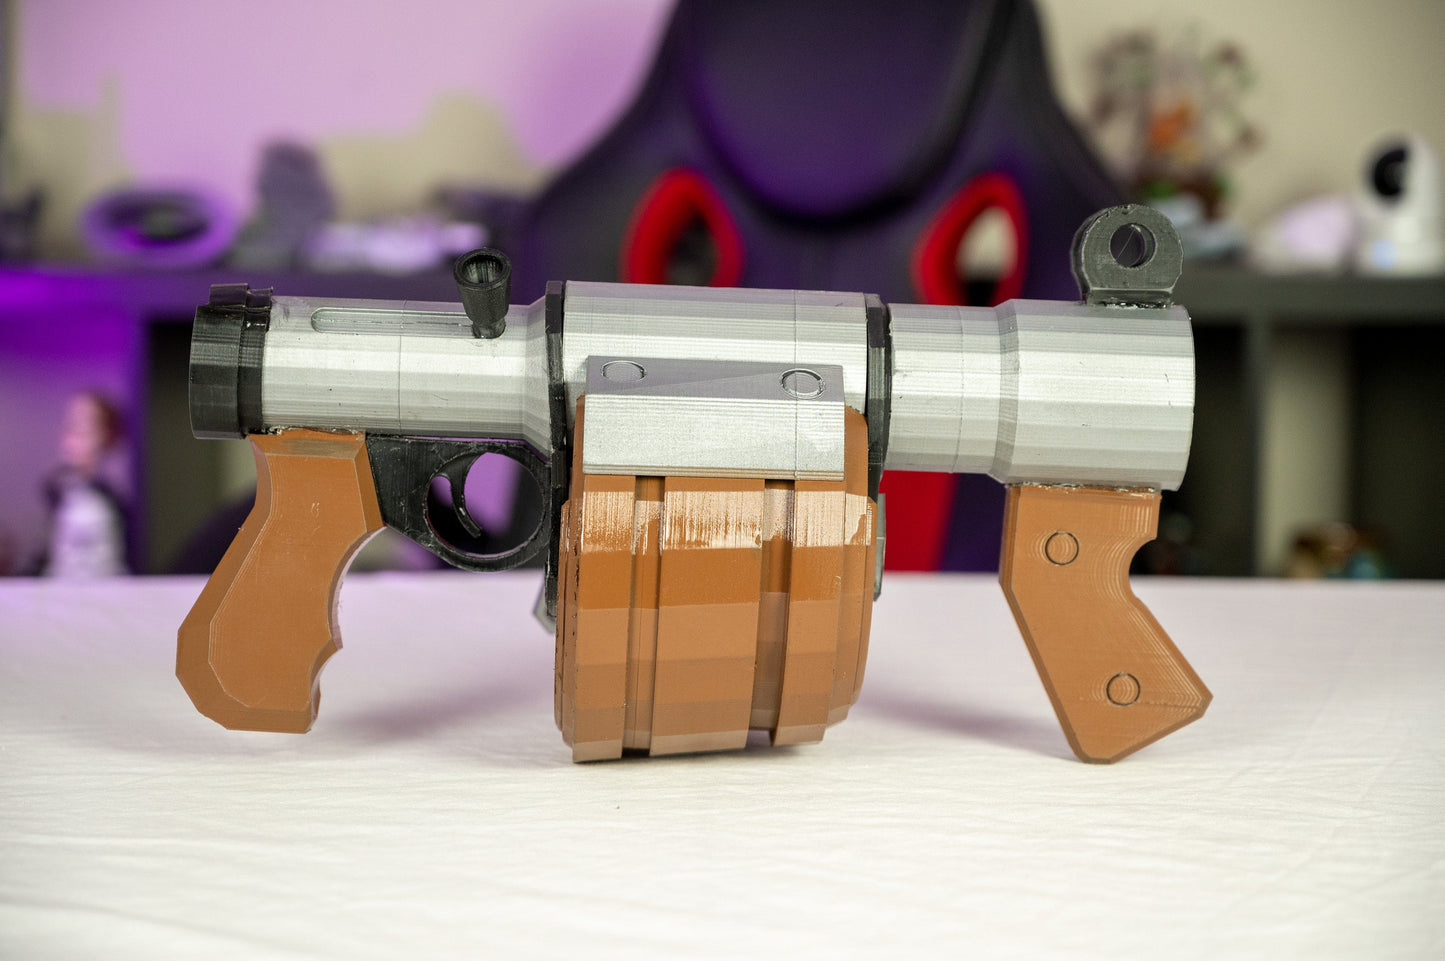 Demoman Stickybomb Launcher Team Fortress TF2 Cosplay NOT A REAL GUN Prop